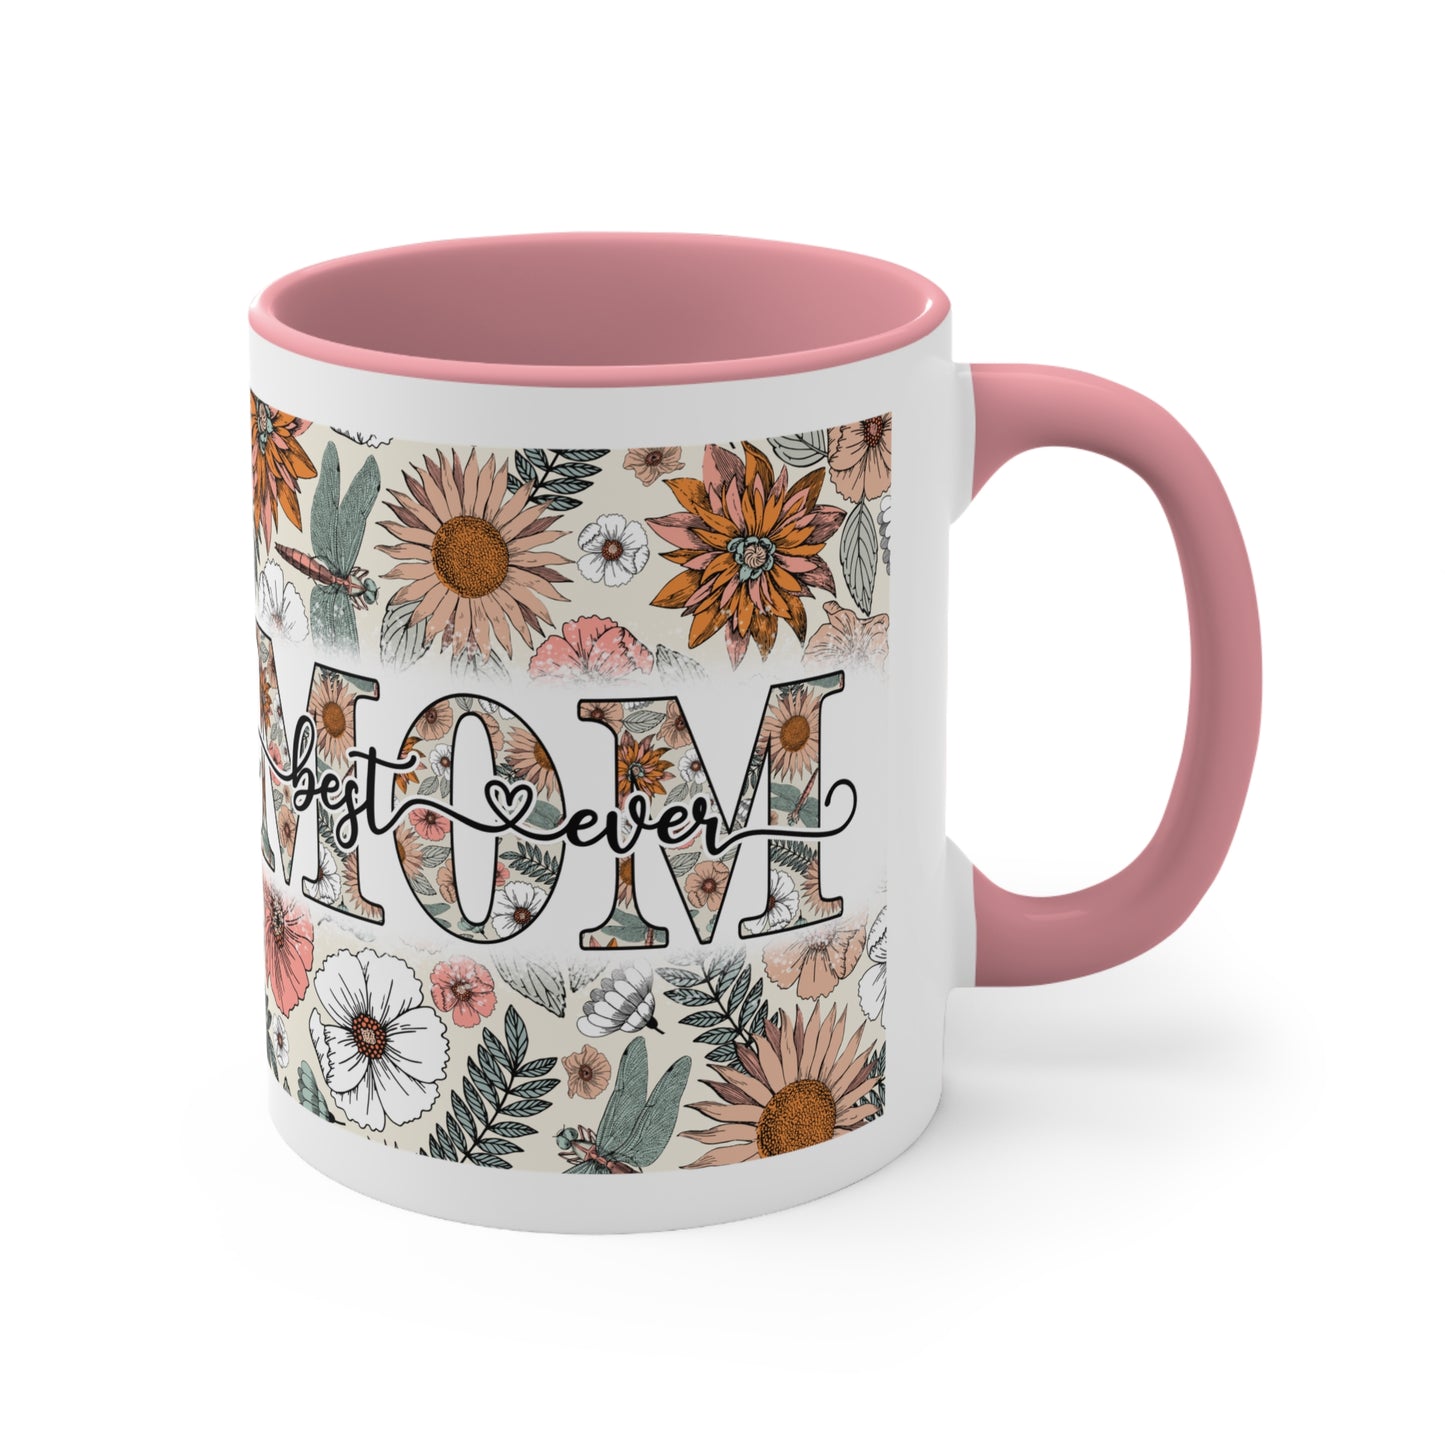 Best Mom Ever Floral Coffee Mug, 11oz Mug, Mother's Day Mug, Gift For Mom, Gift For Her, Coffee Cup For Mom, Present For Mom